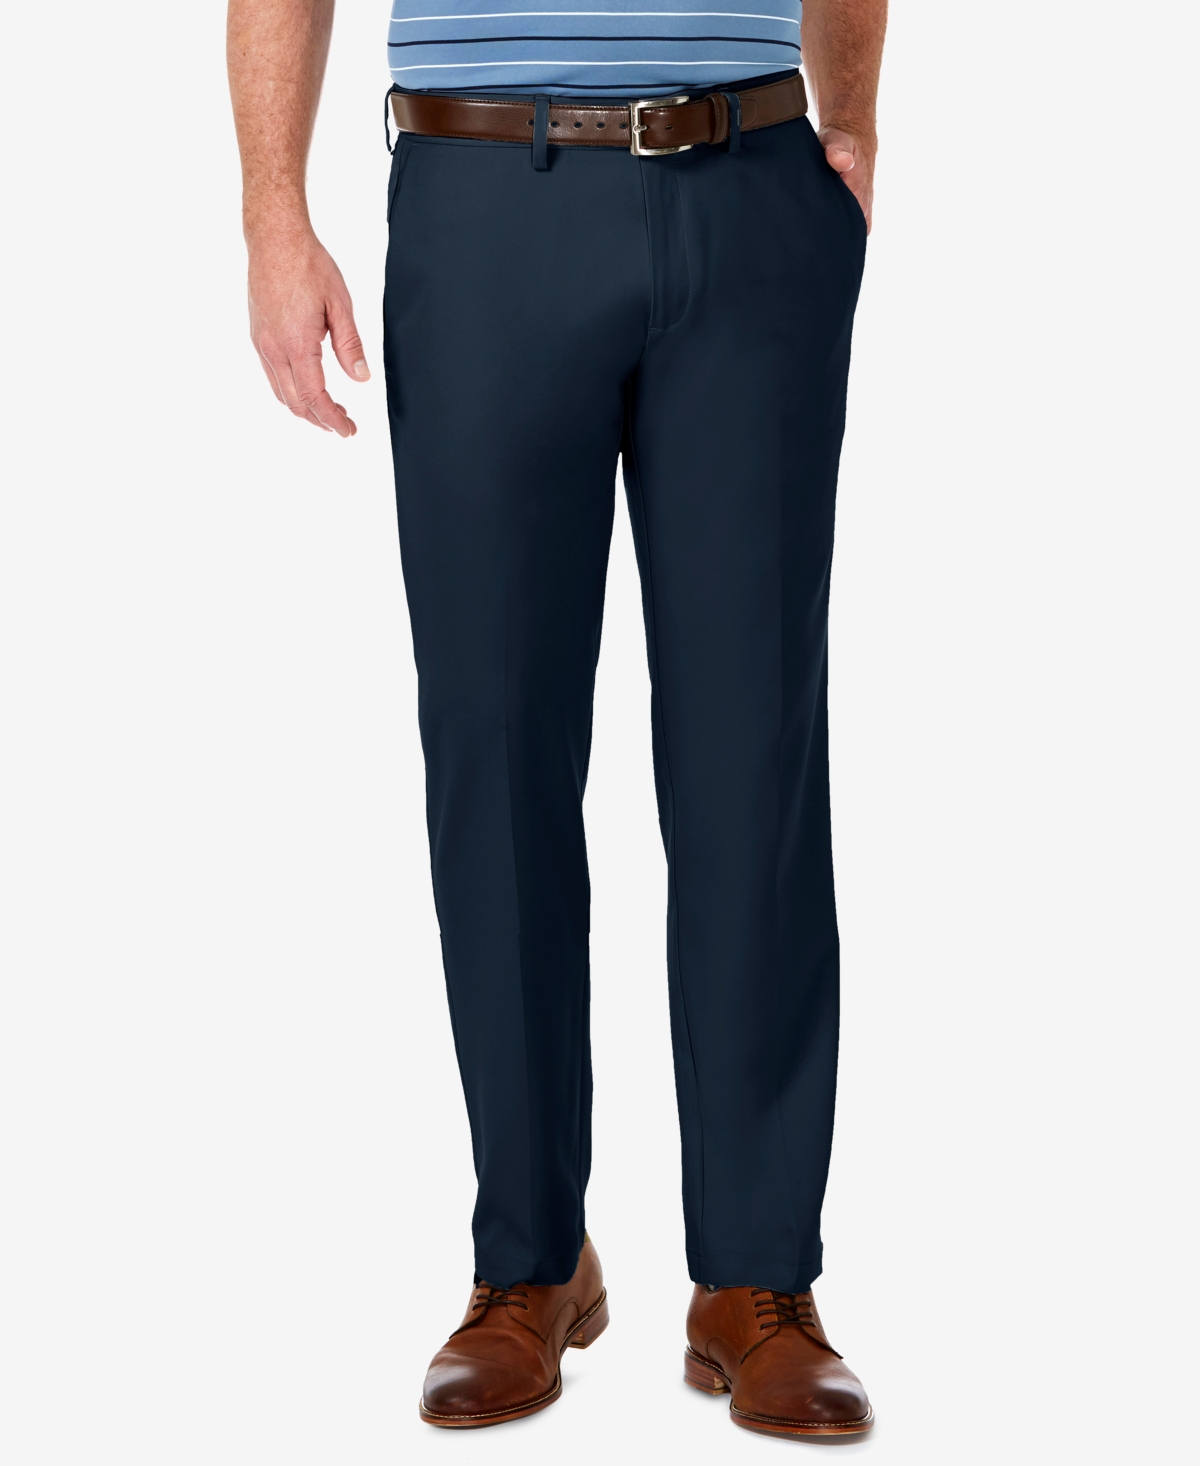 Men's Cool 18 Pro Stretch Straight Fit Flat Front Dress Pants - Navy